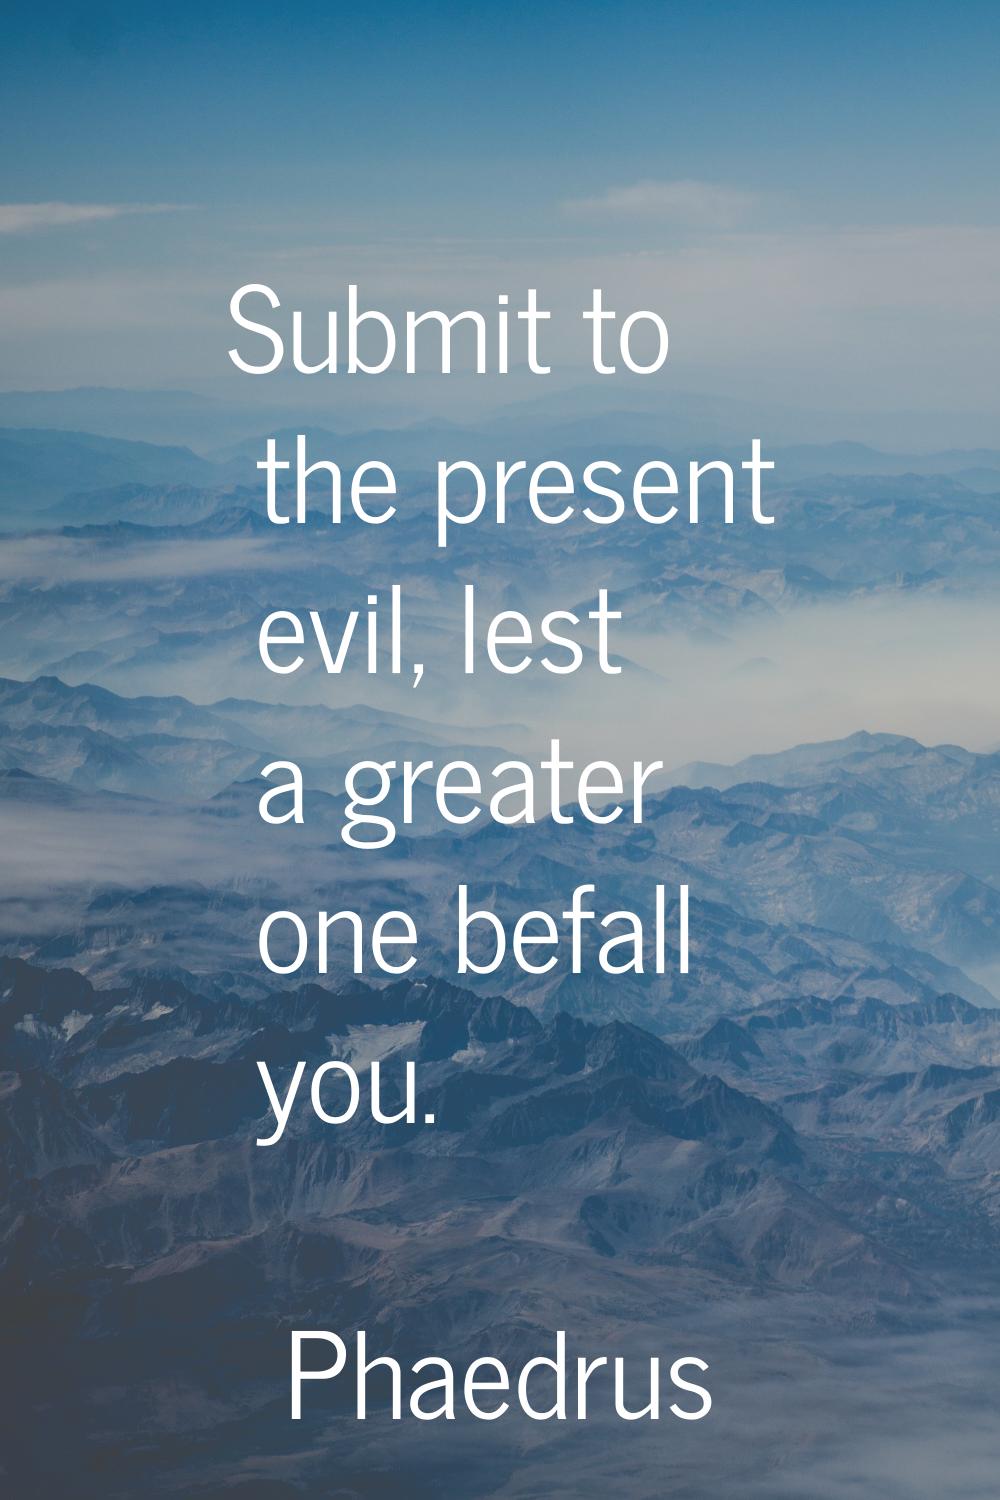 Submit to the present evil, lest a greater one befall you.